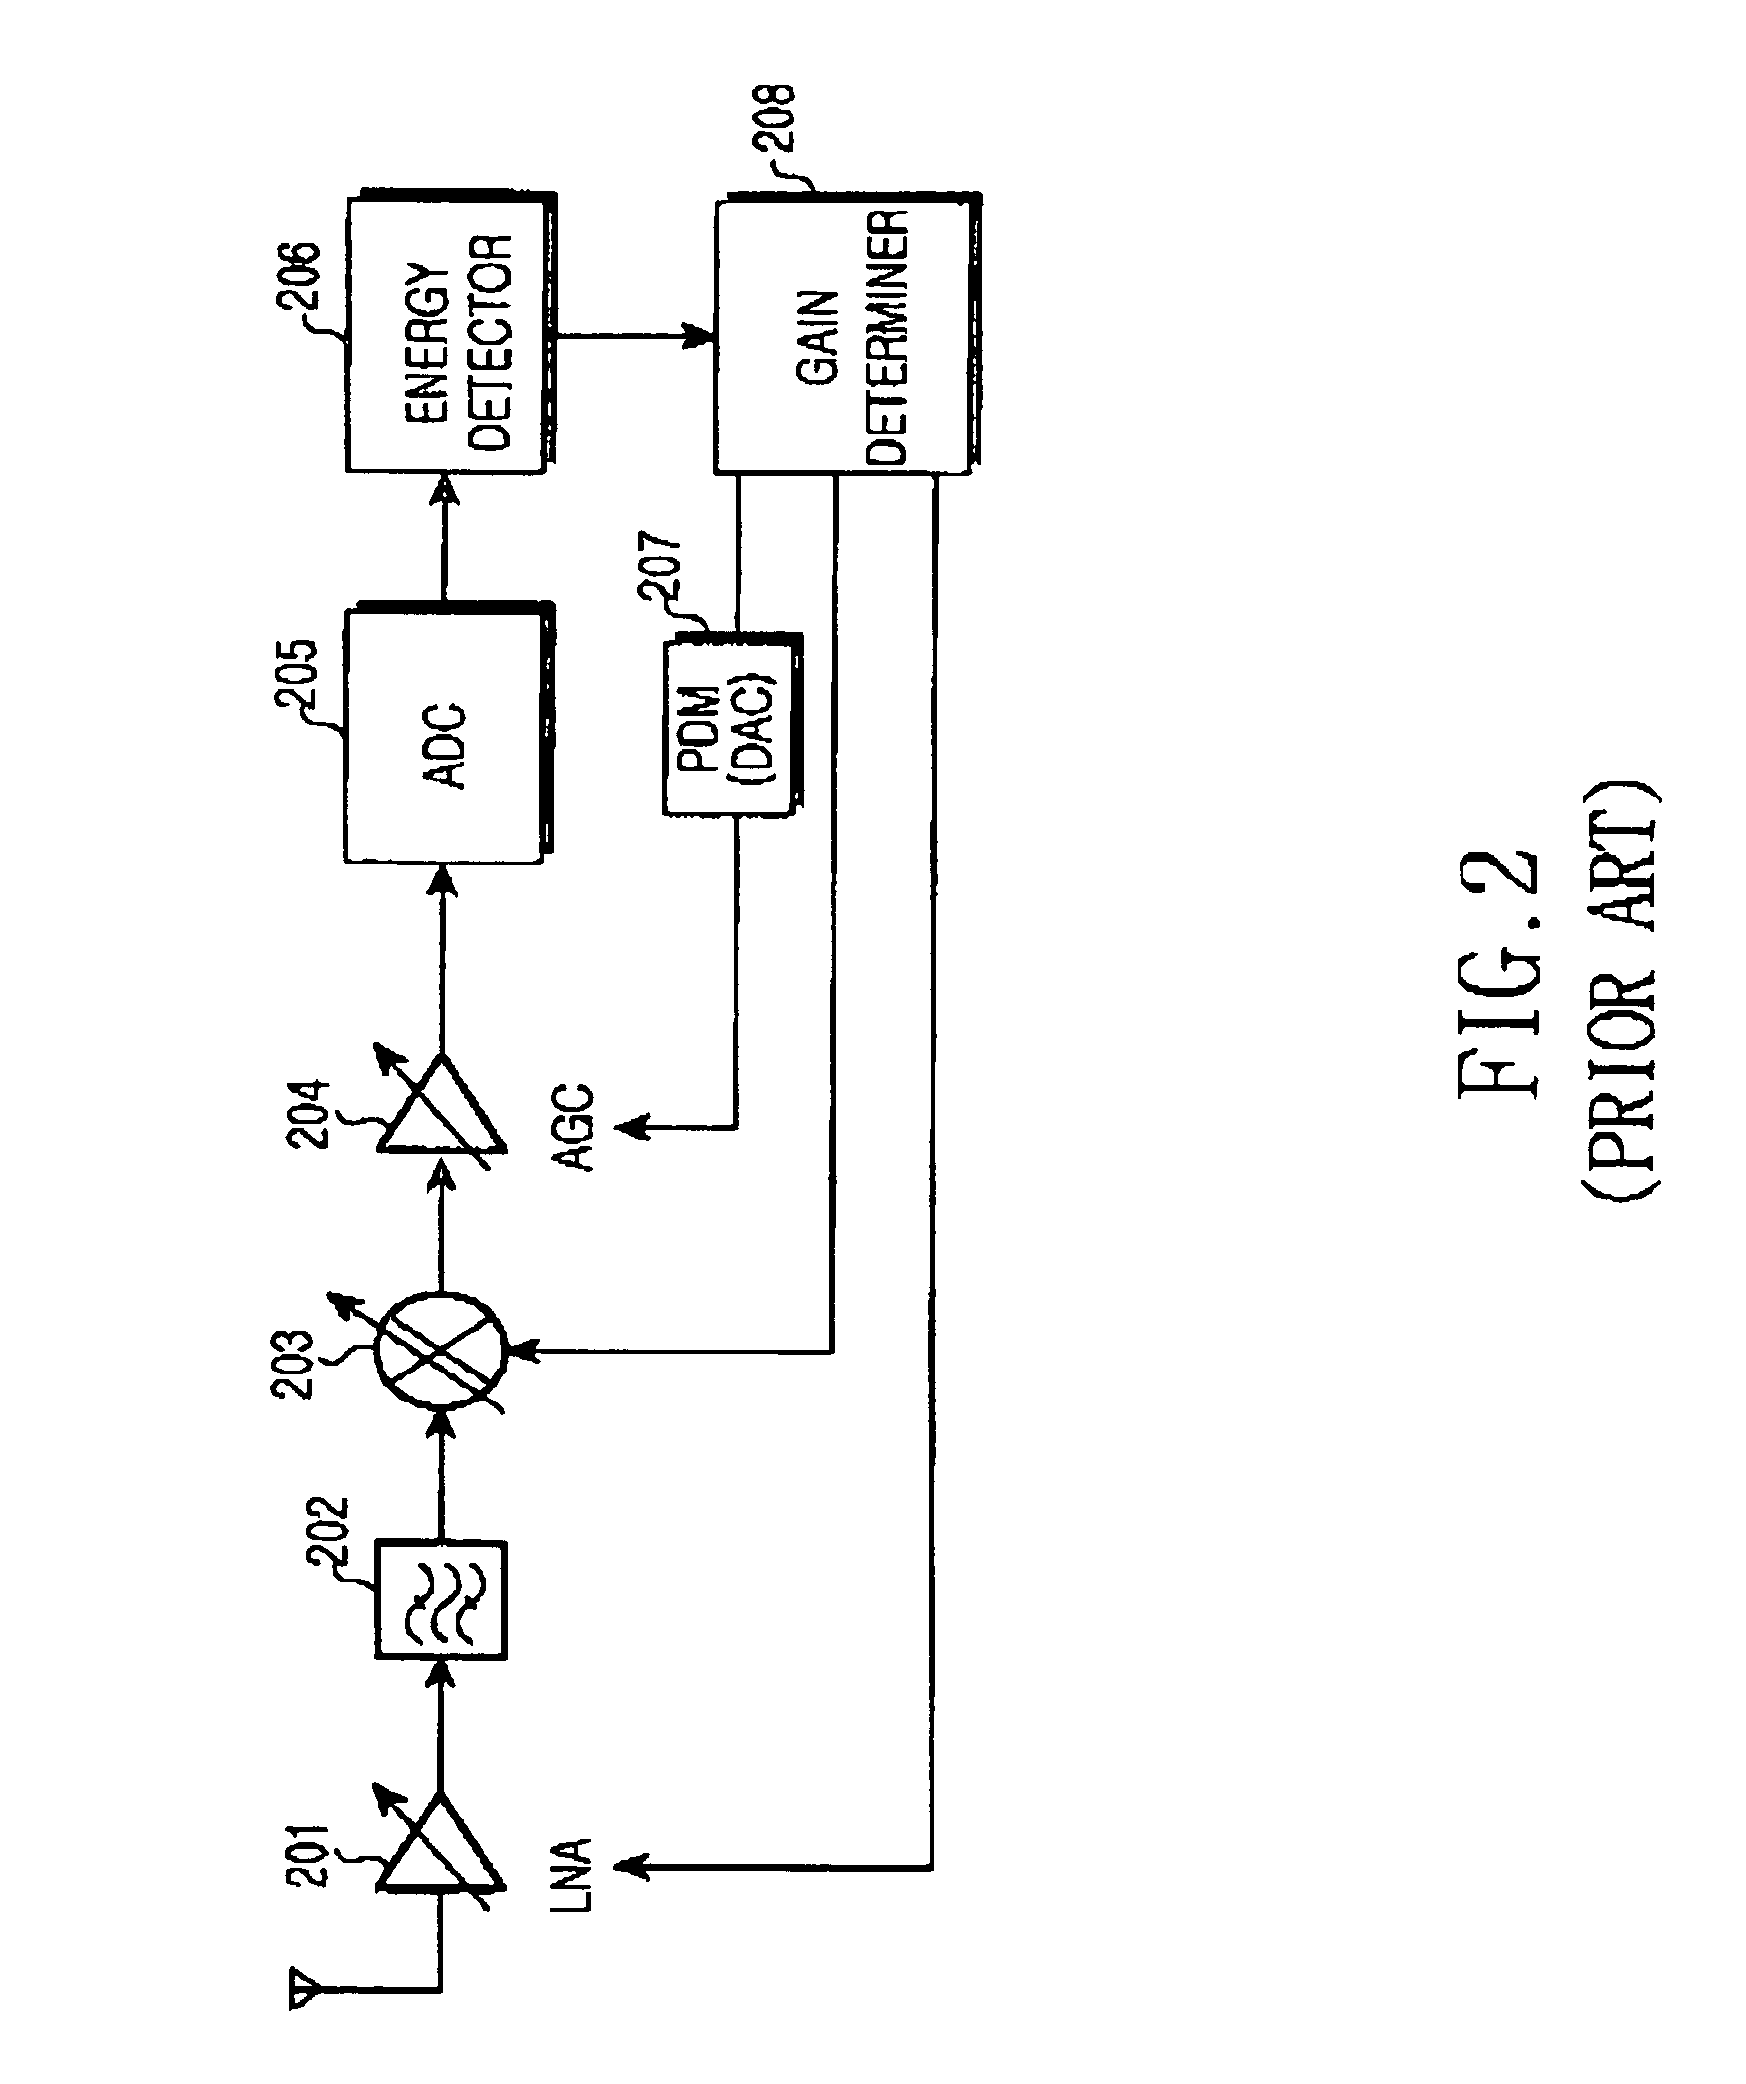 Temperature compensation device for automatic gain control loop